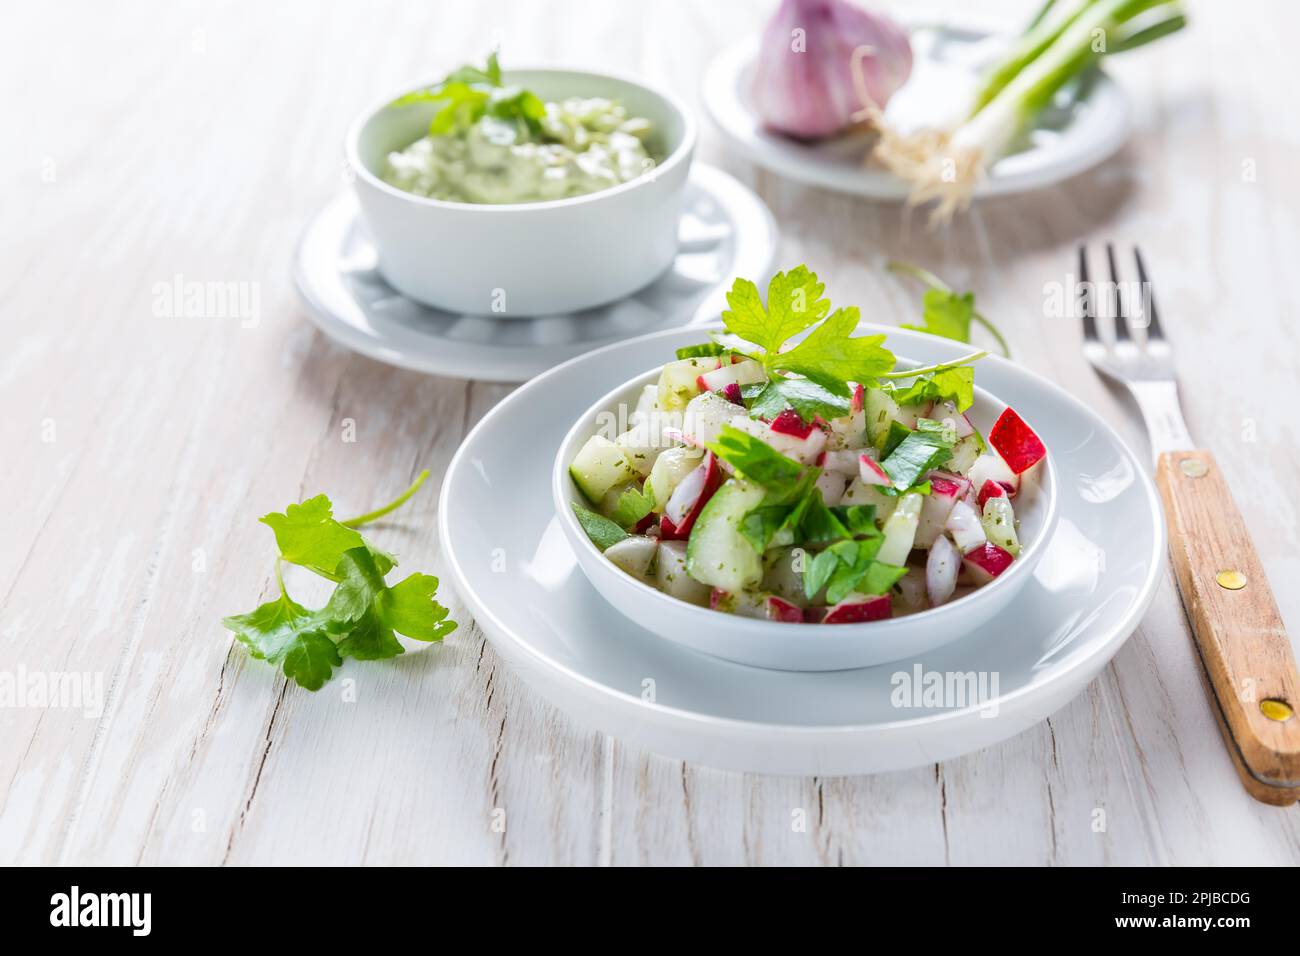 Spring salad with radish, cucumber and avocado. With avocado dip and scallions Stock Photo